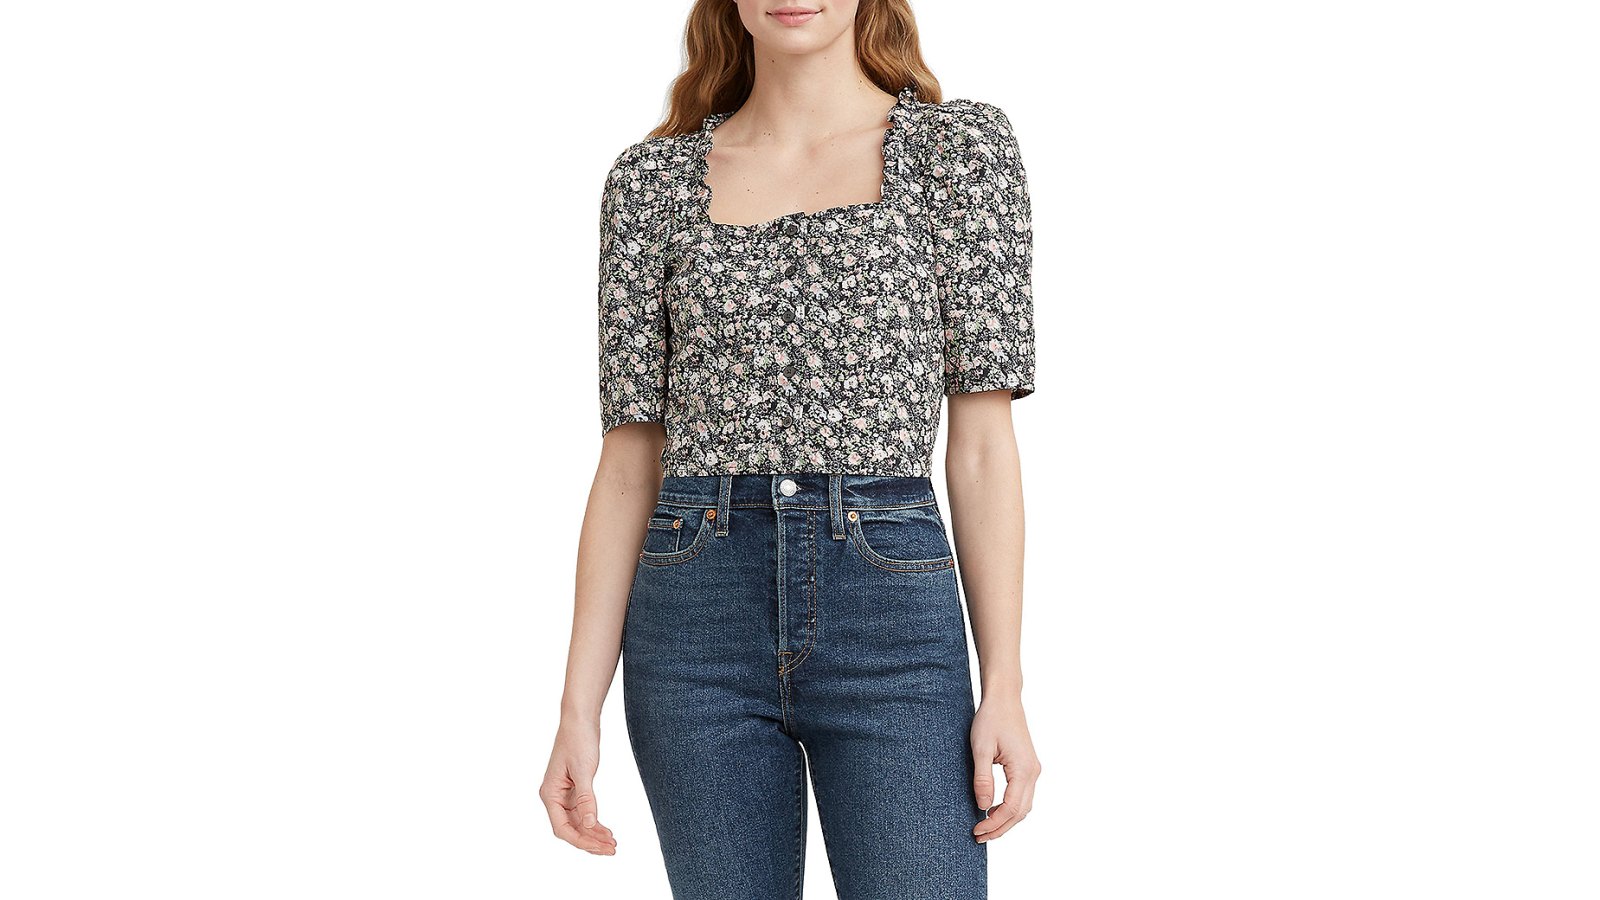 Levi's Floral at Walmart in 2 Colors